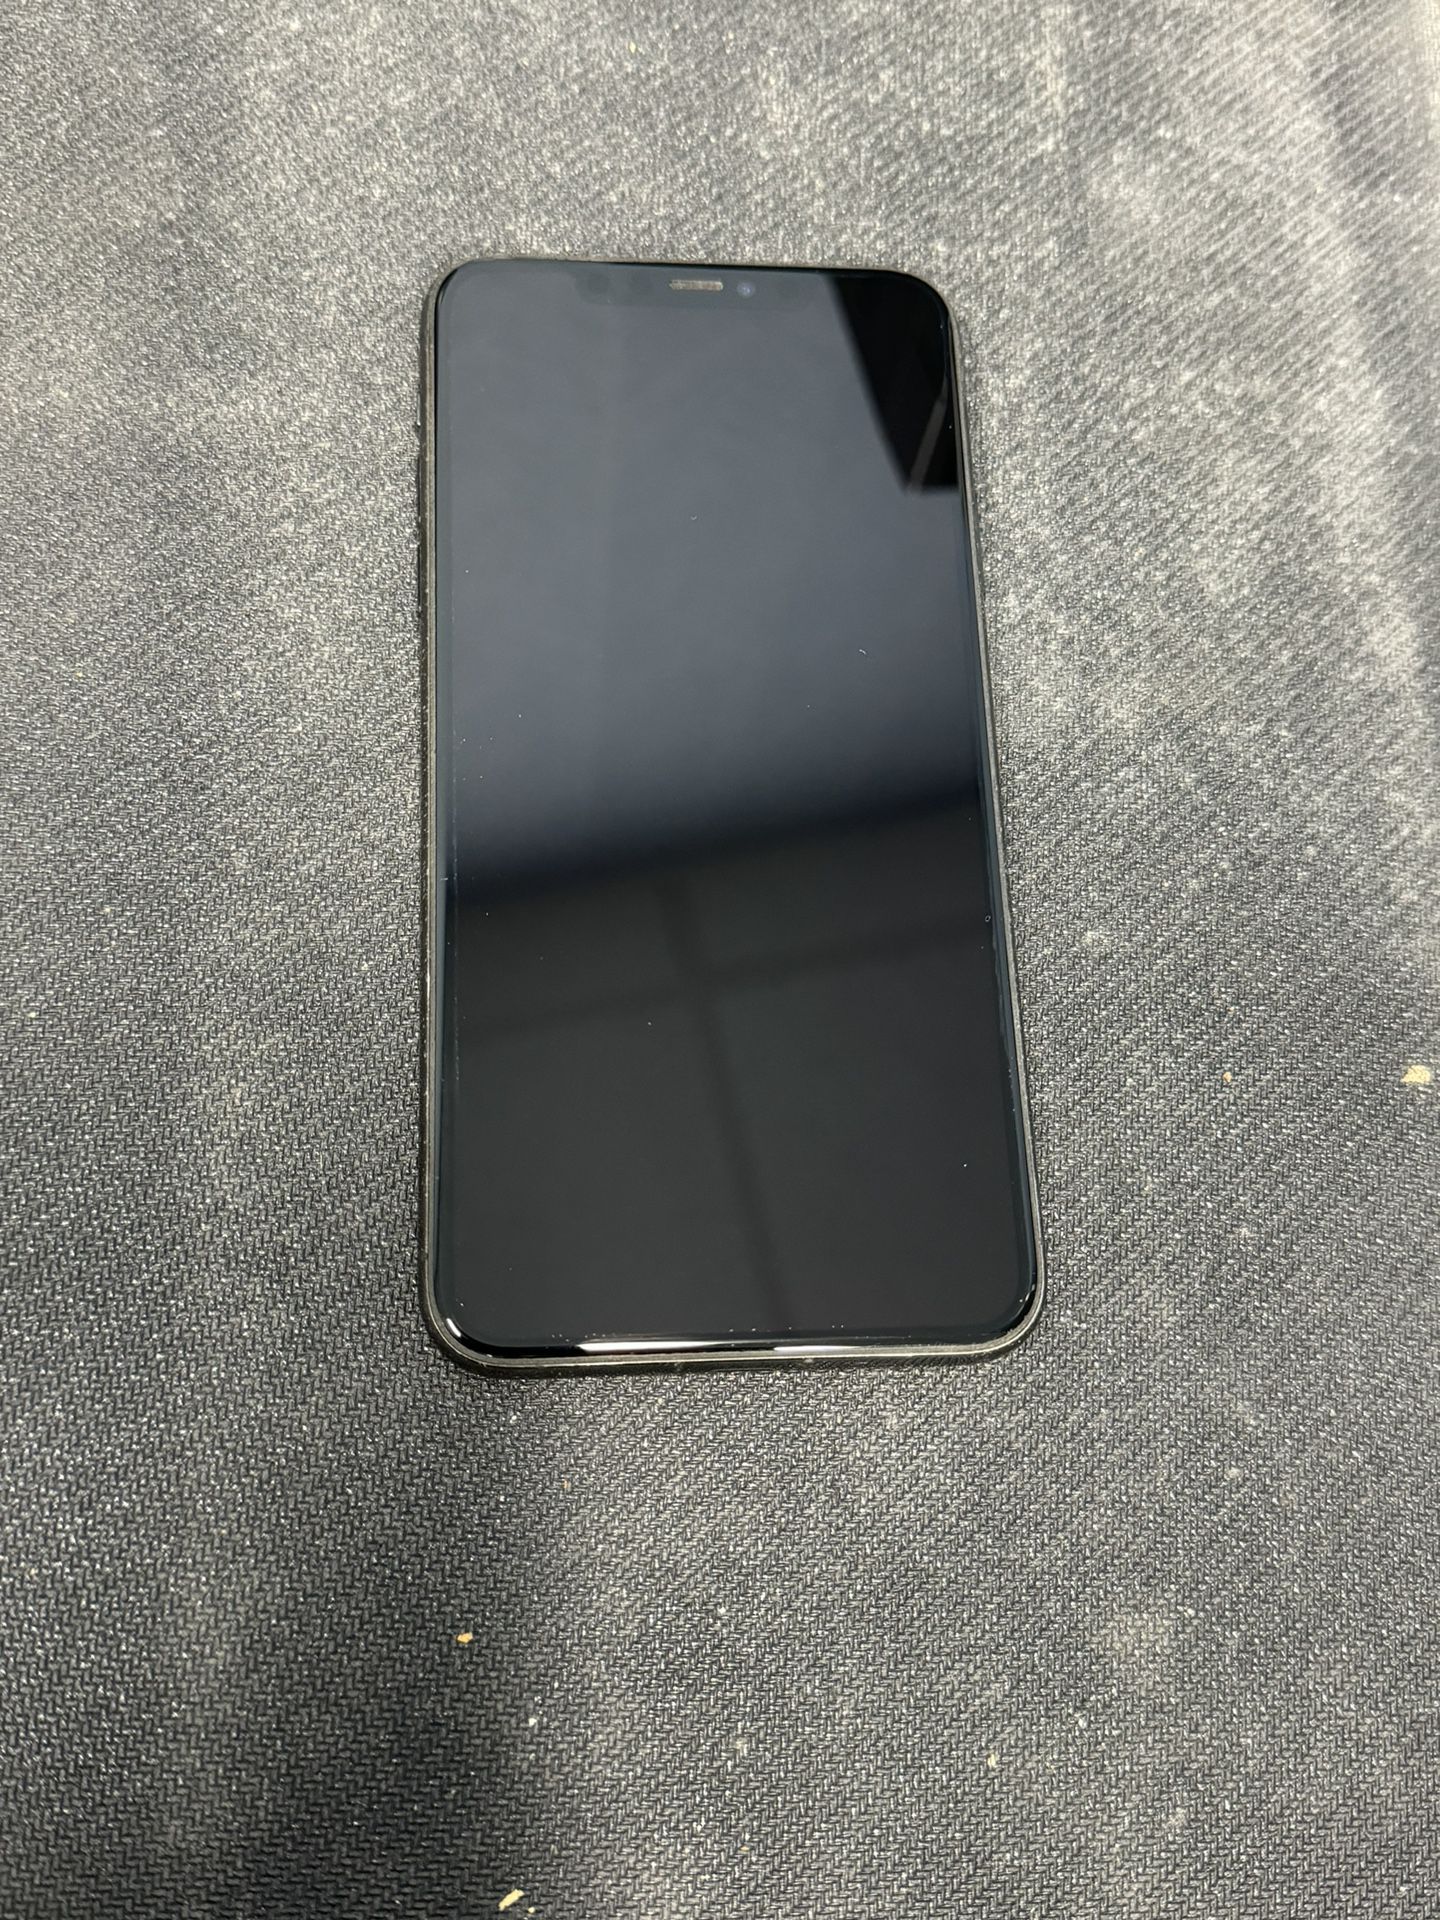 iPhone 11 Pro Max Unlocked $375 for Sale in Haverhill, MA - OfferUp